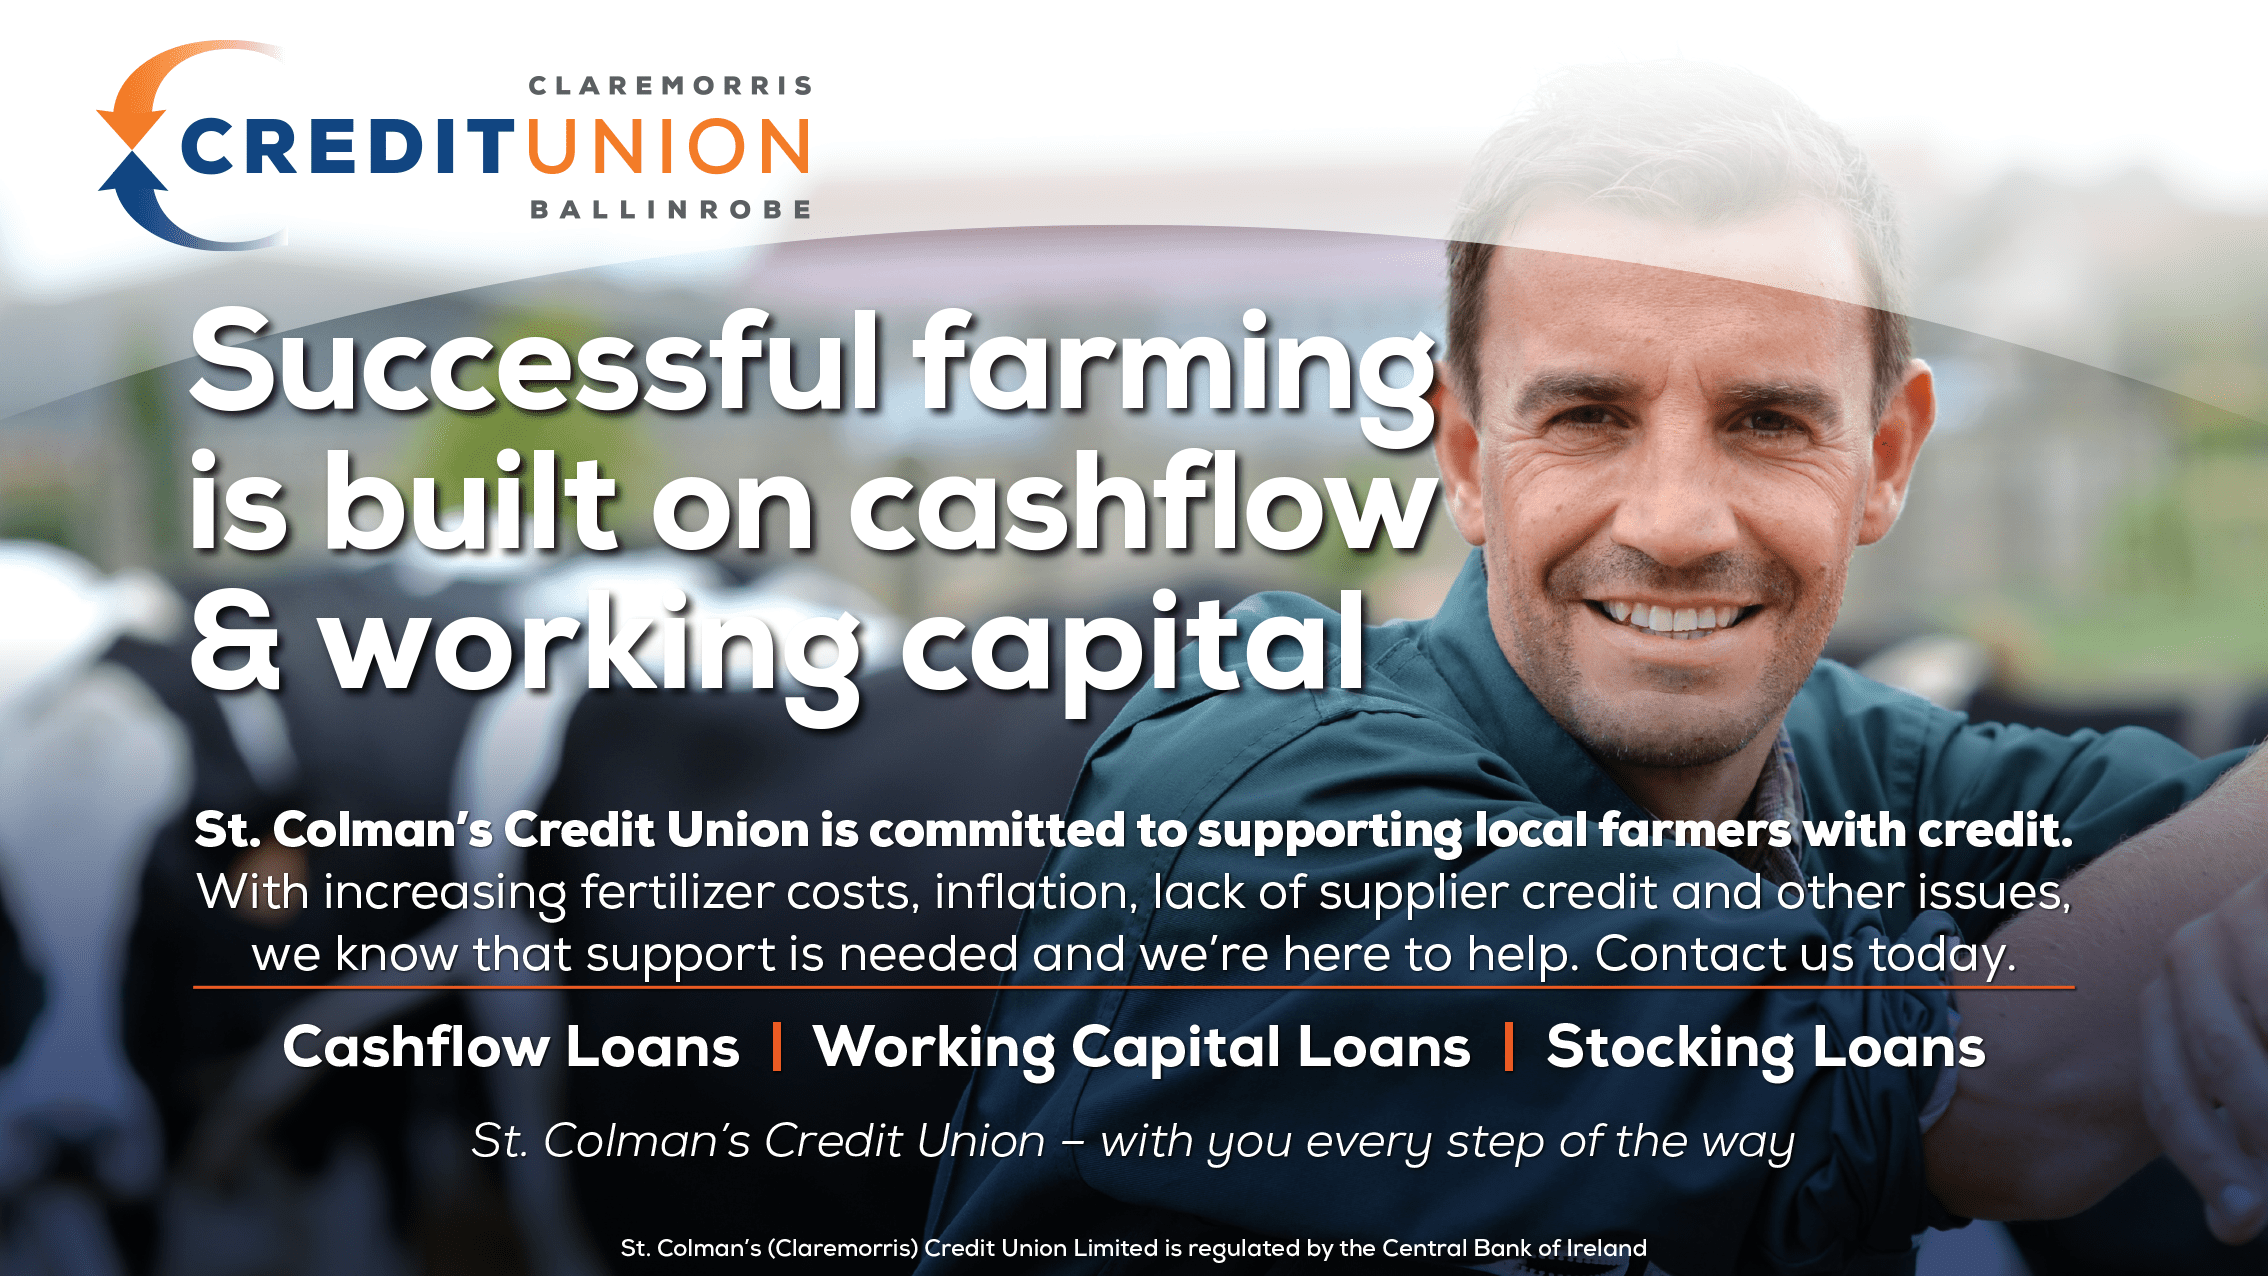 Agri Working Capital available from St. Colman's Credit Union